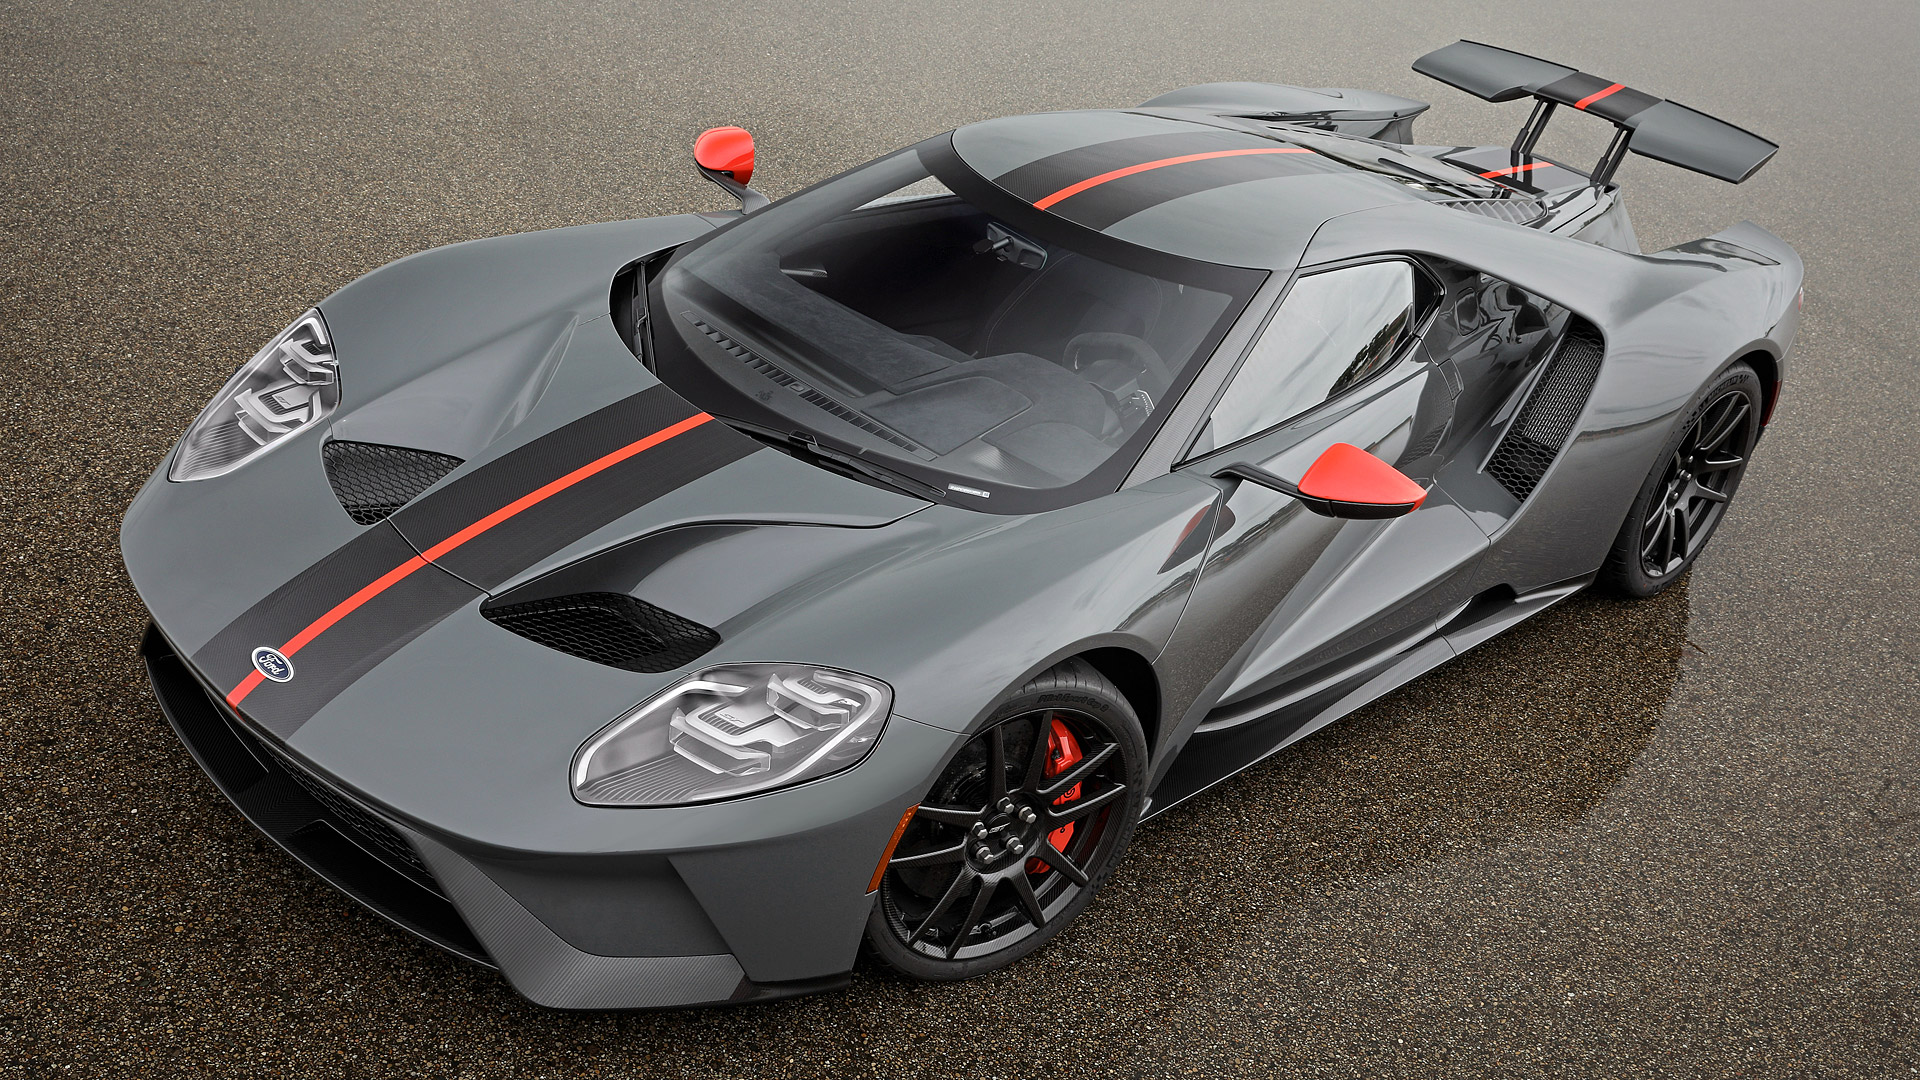  2019 Ford GT Carbon Series Wallpaper.